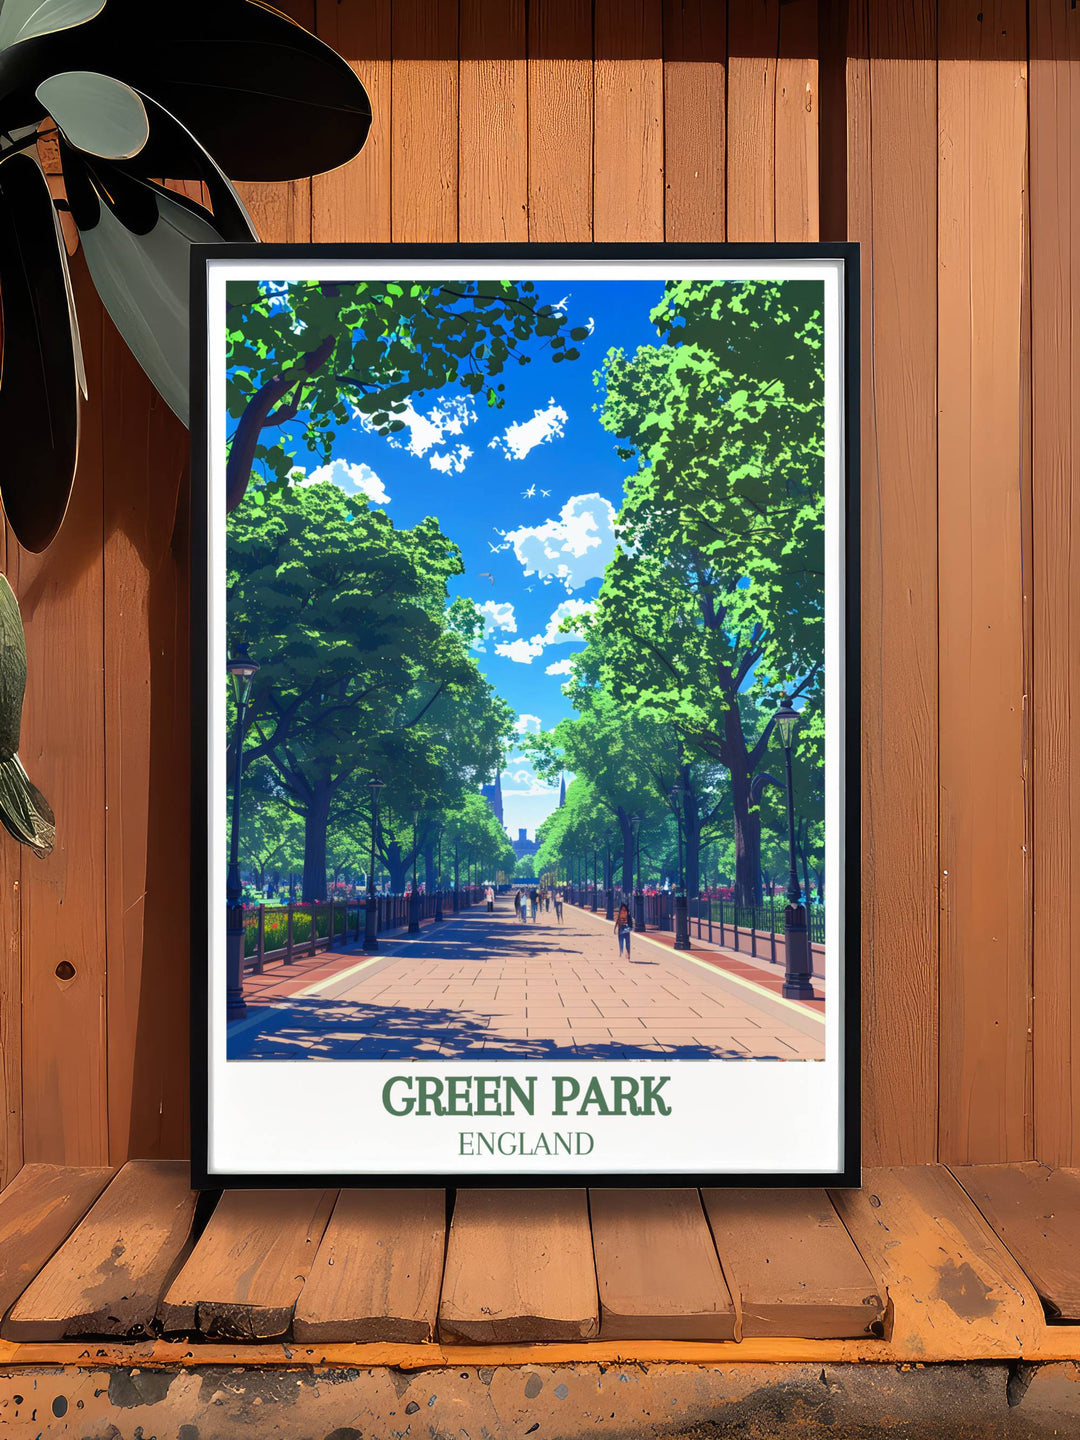 Beautiful London travel poster depicting the scenic Princess of Wales Memorial Walk in Green Park London, ideal for enhancing any living space with a touch of British charm.